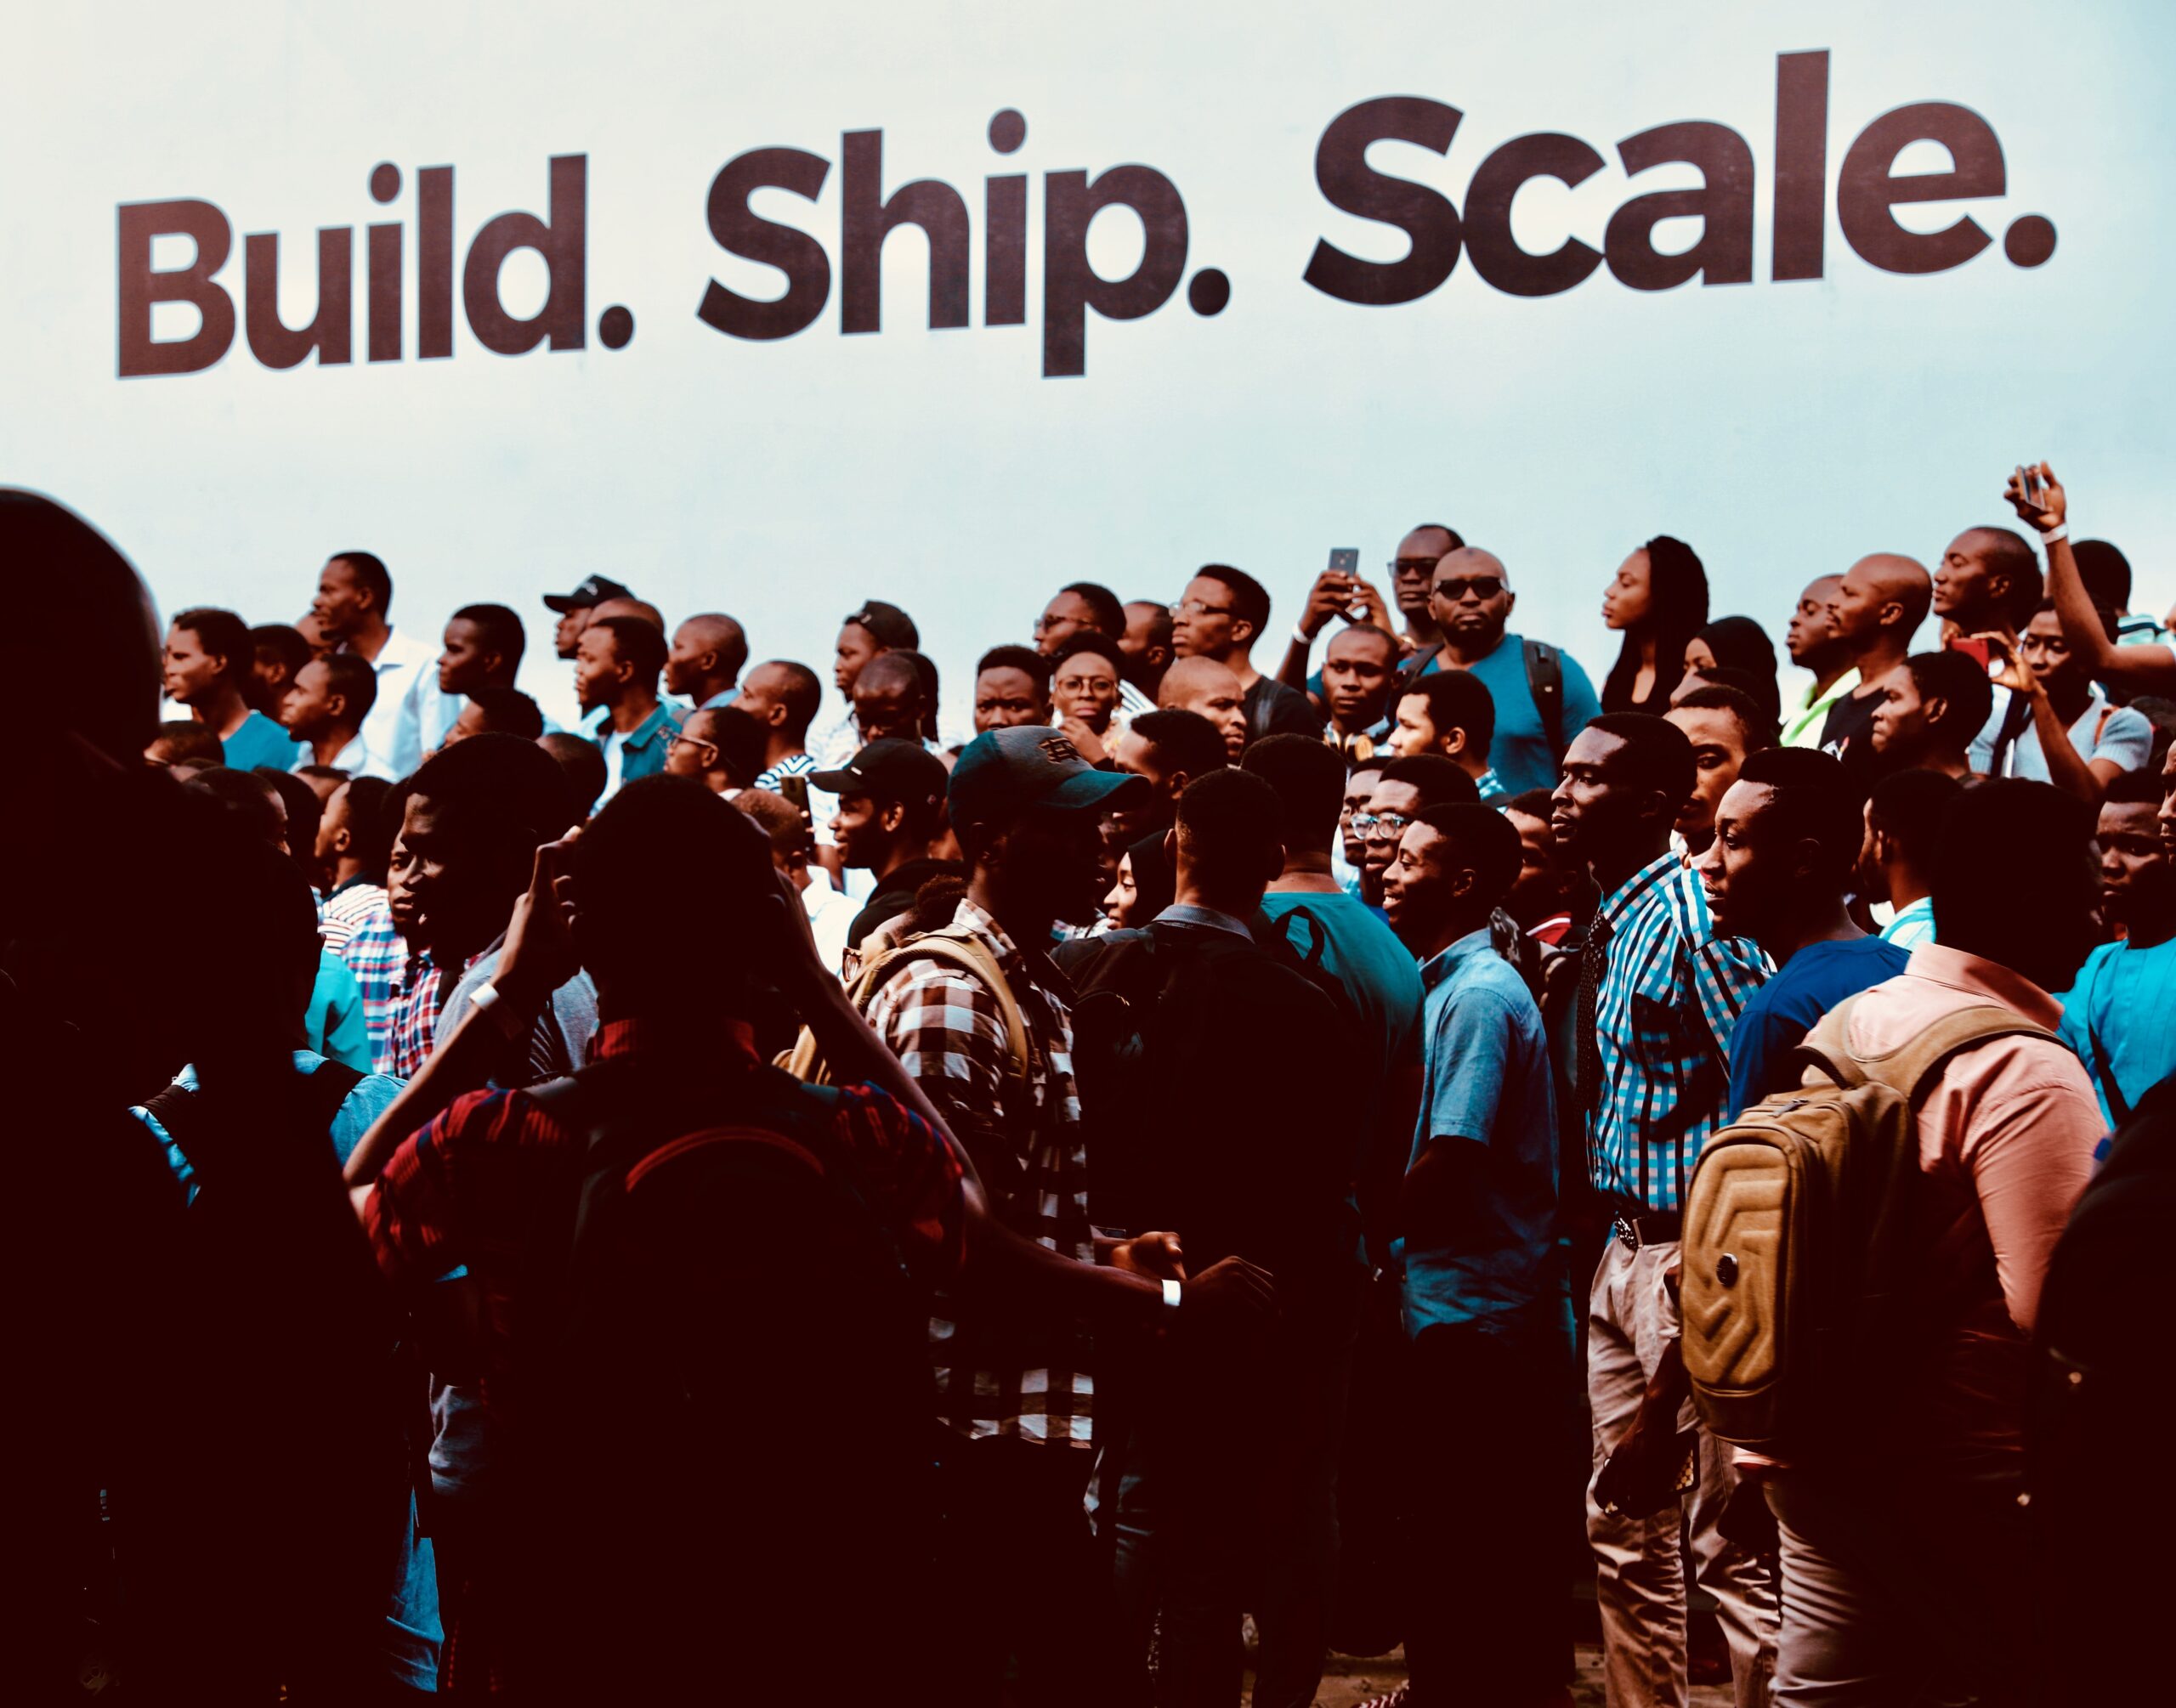 Depicts many people standing in front of a wall that says "Build. Ship. Scale." Used to represent startups / equity crowdfunding as an asset class.